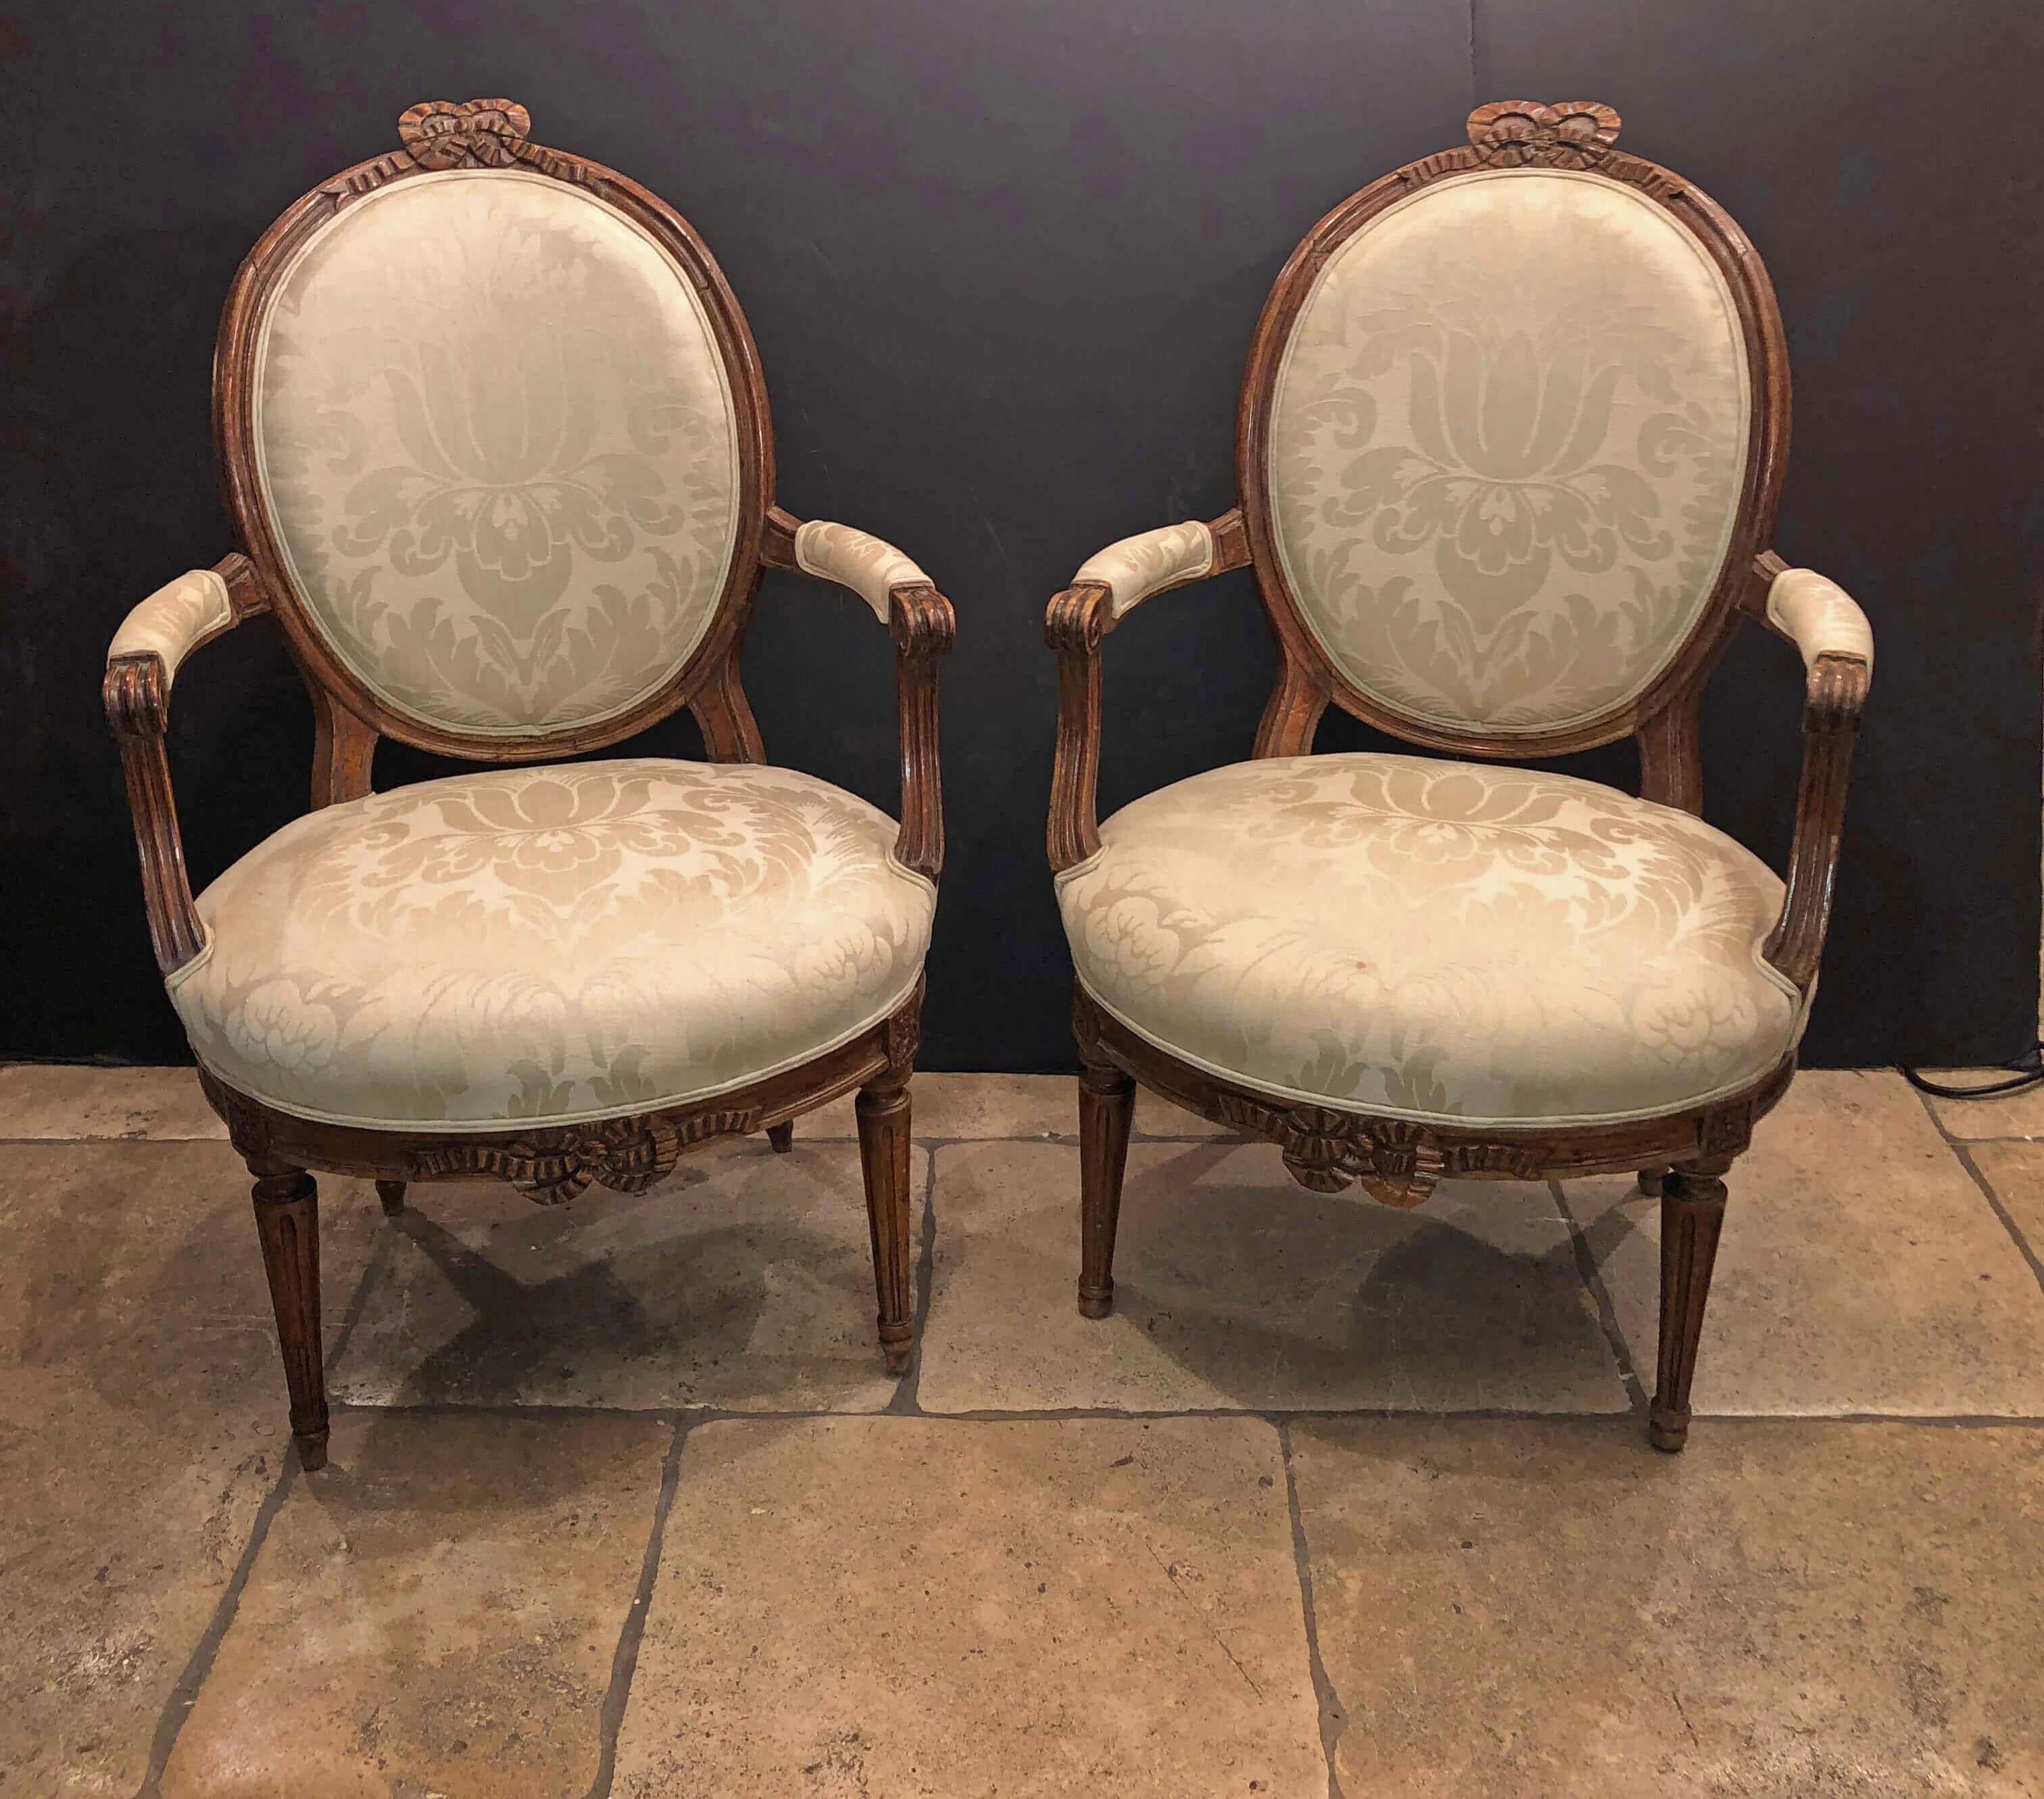 A matched pair of French Louis XVI carved walnut oval back Fatueil a La Reine with oval seats, carved bowknots, 20 fluted arms and turned, tapered and fluted legs.